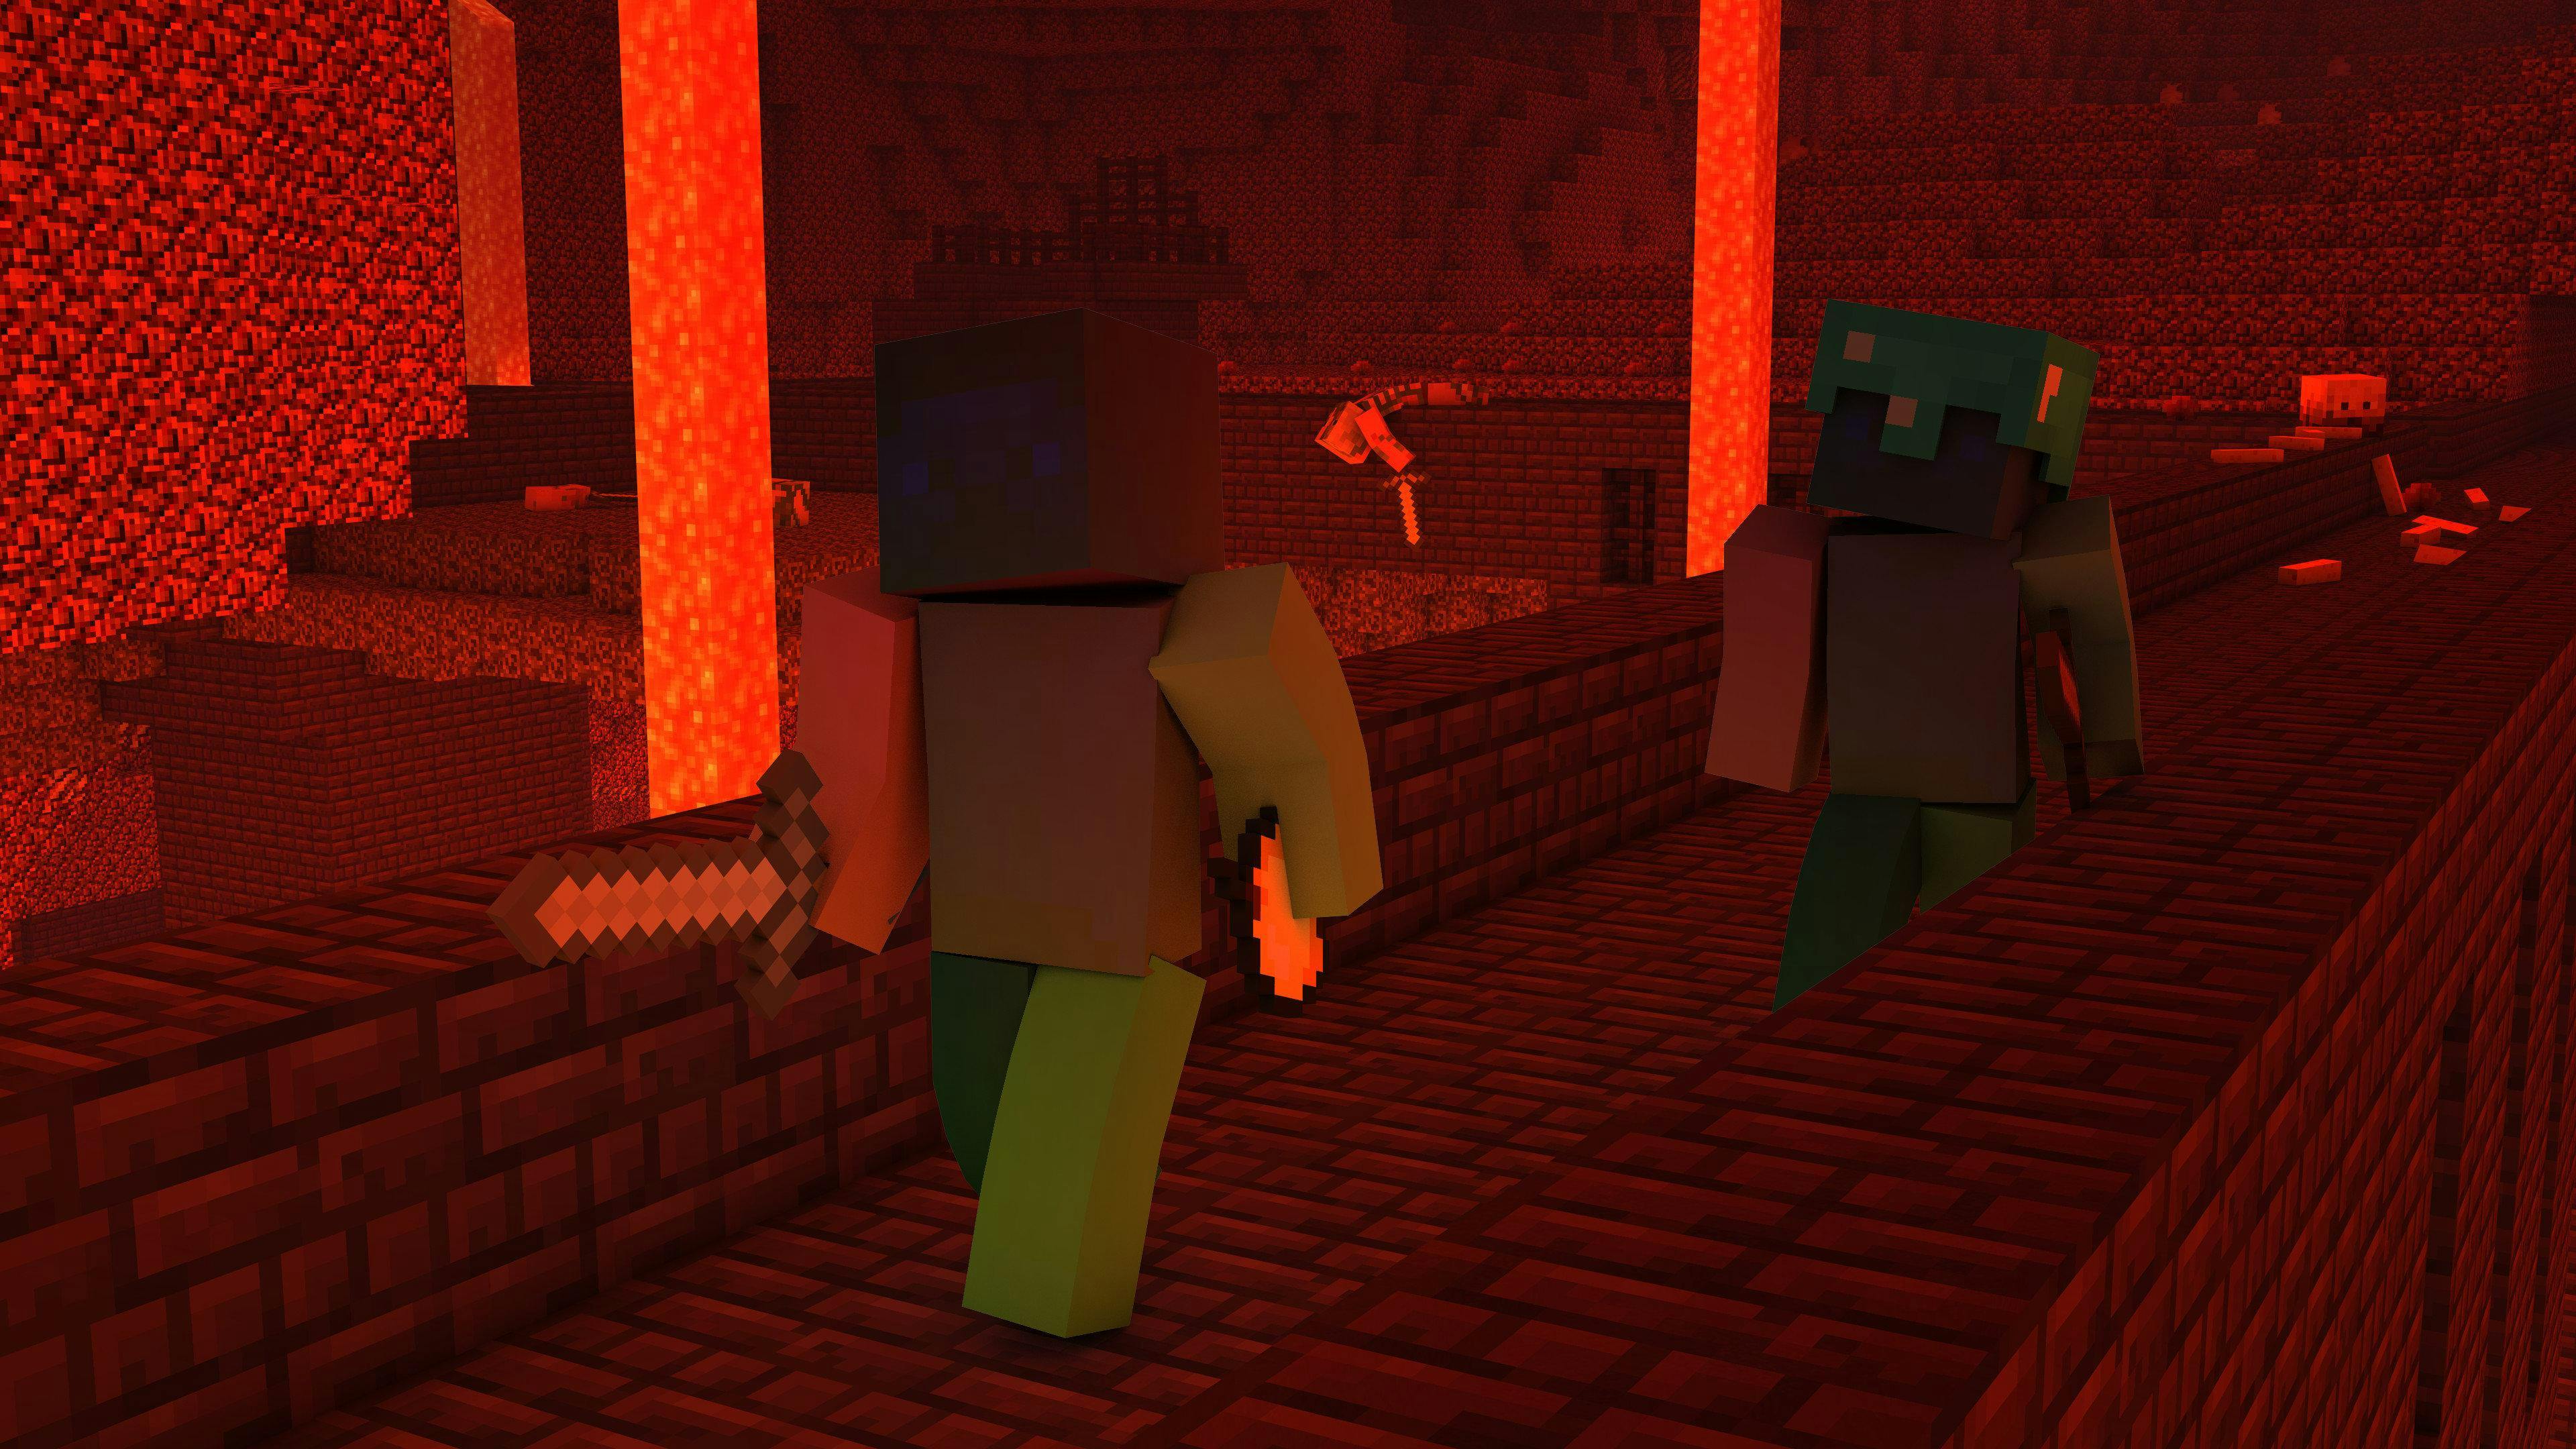 Nether!